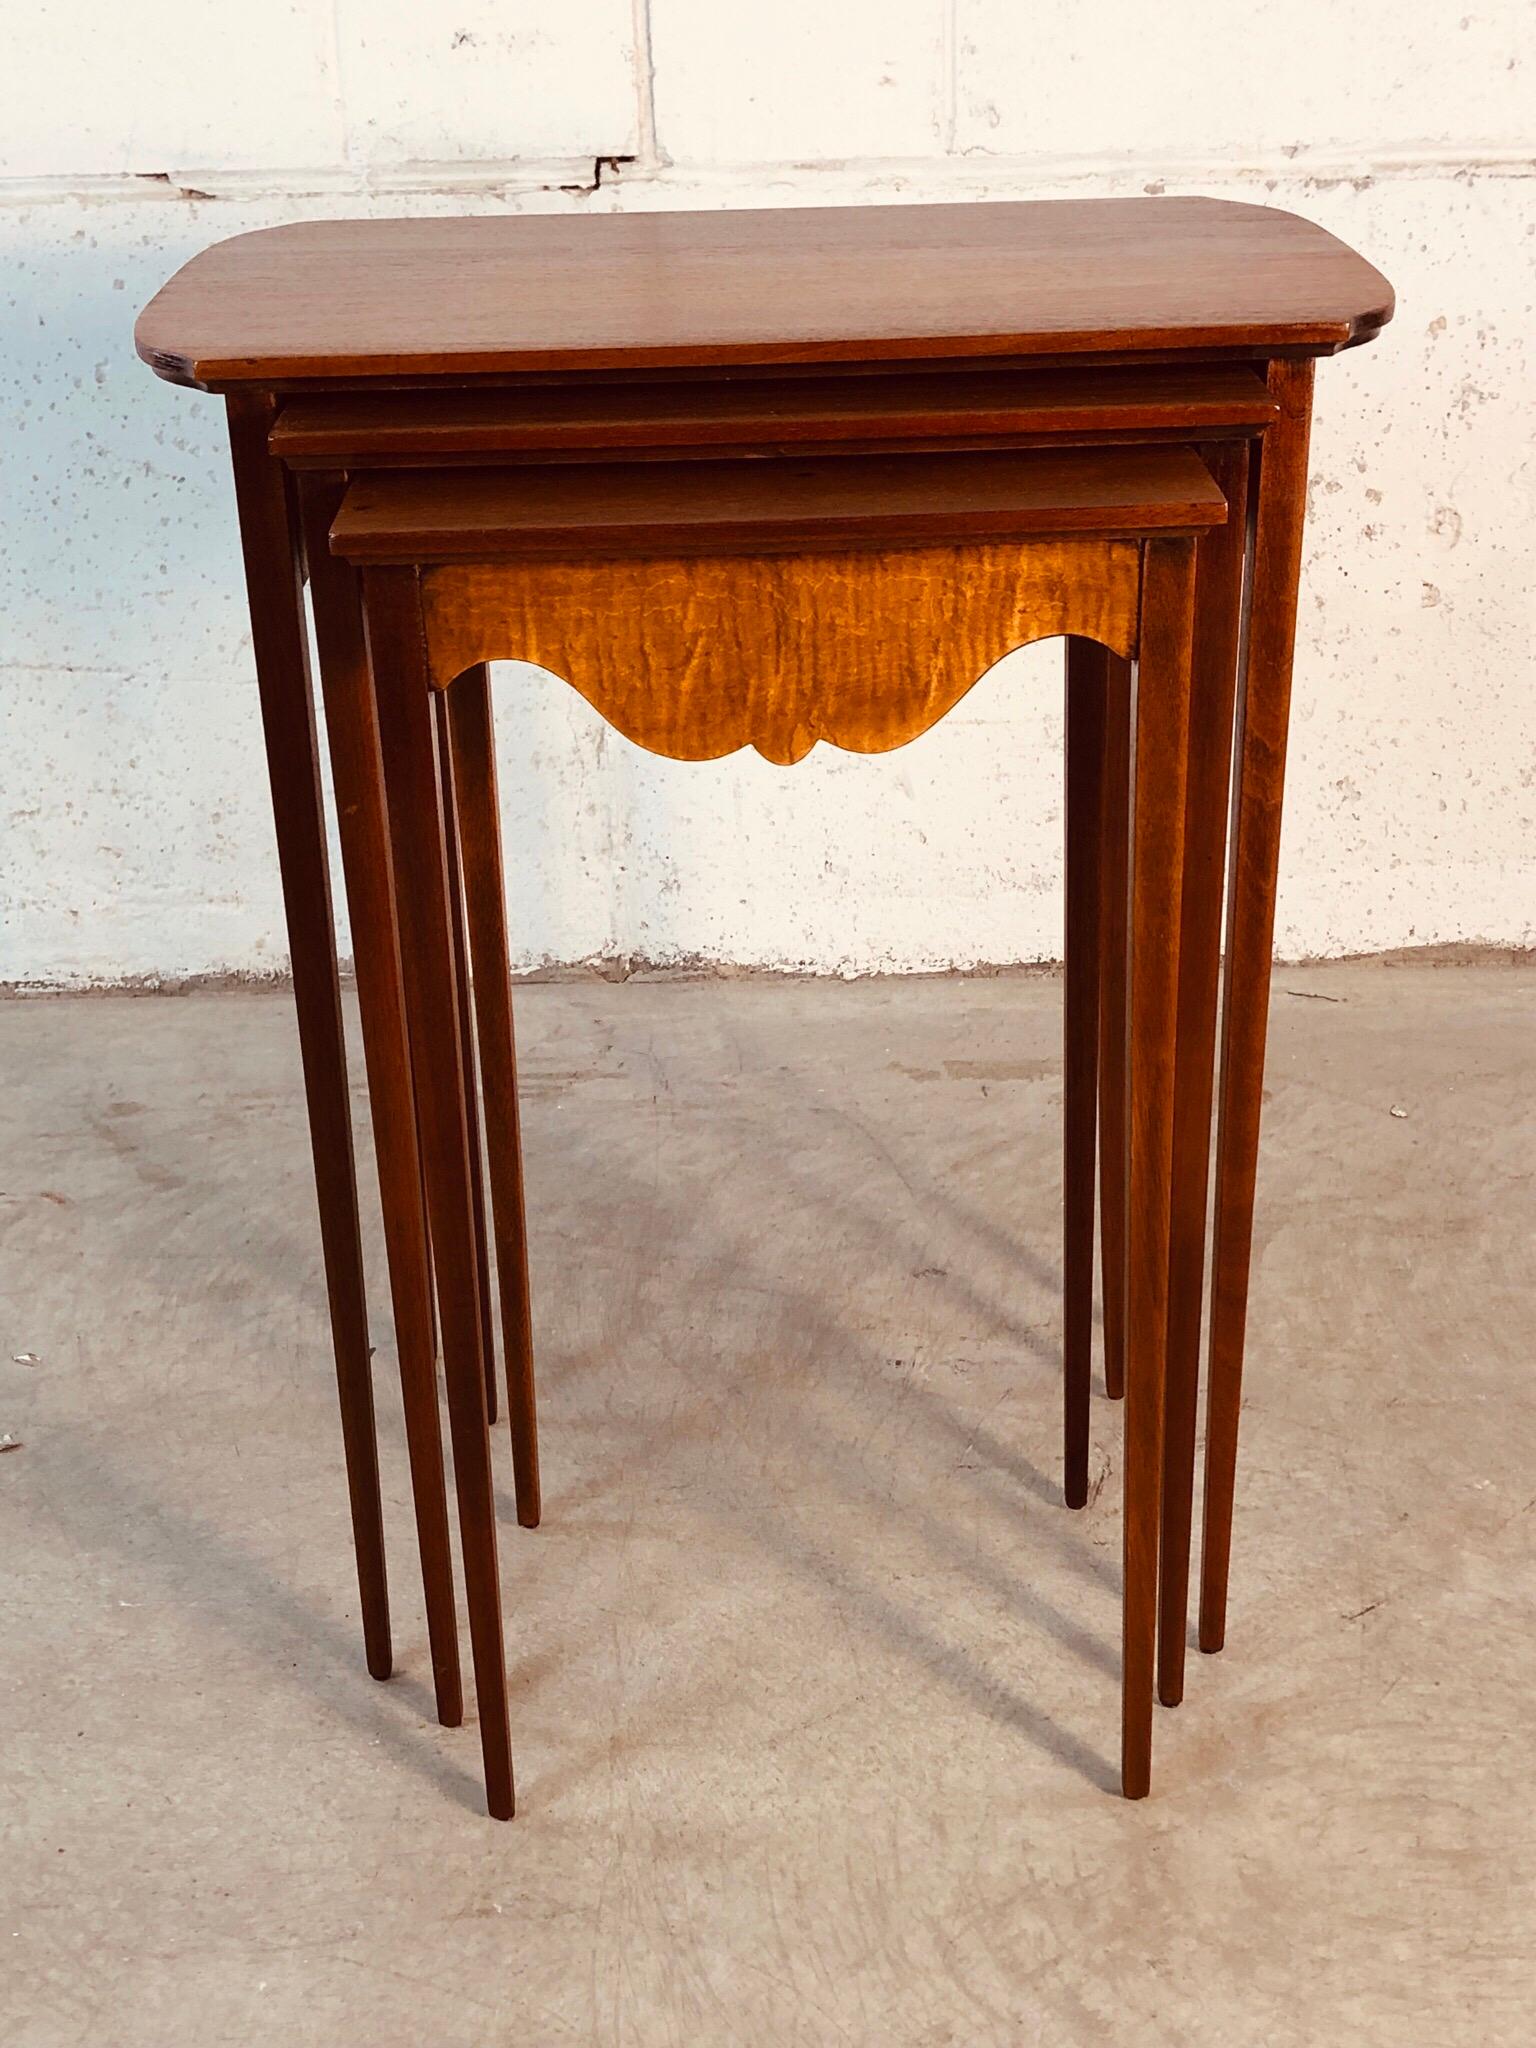 1950s set of 3 mahogany nesting tables with a tiger maple accent. The tables have very thin and delicate legs. No marks. They have been refinished and restored. The top table does still have a lighter stain that shows in the photos.